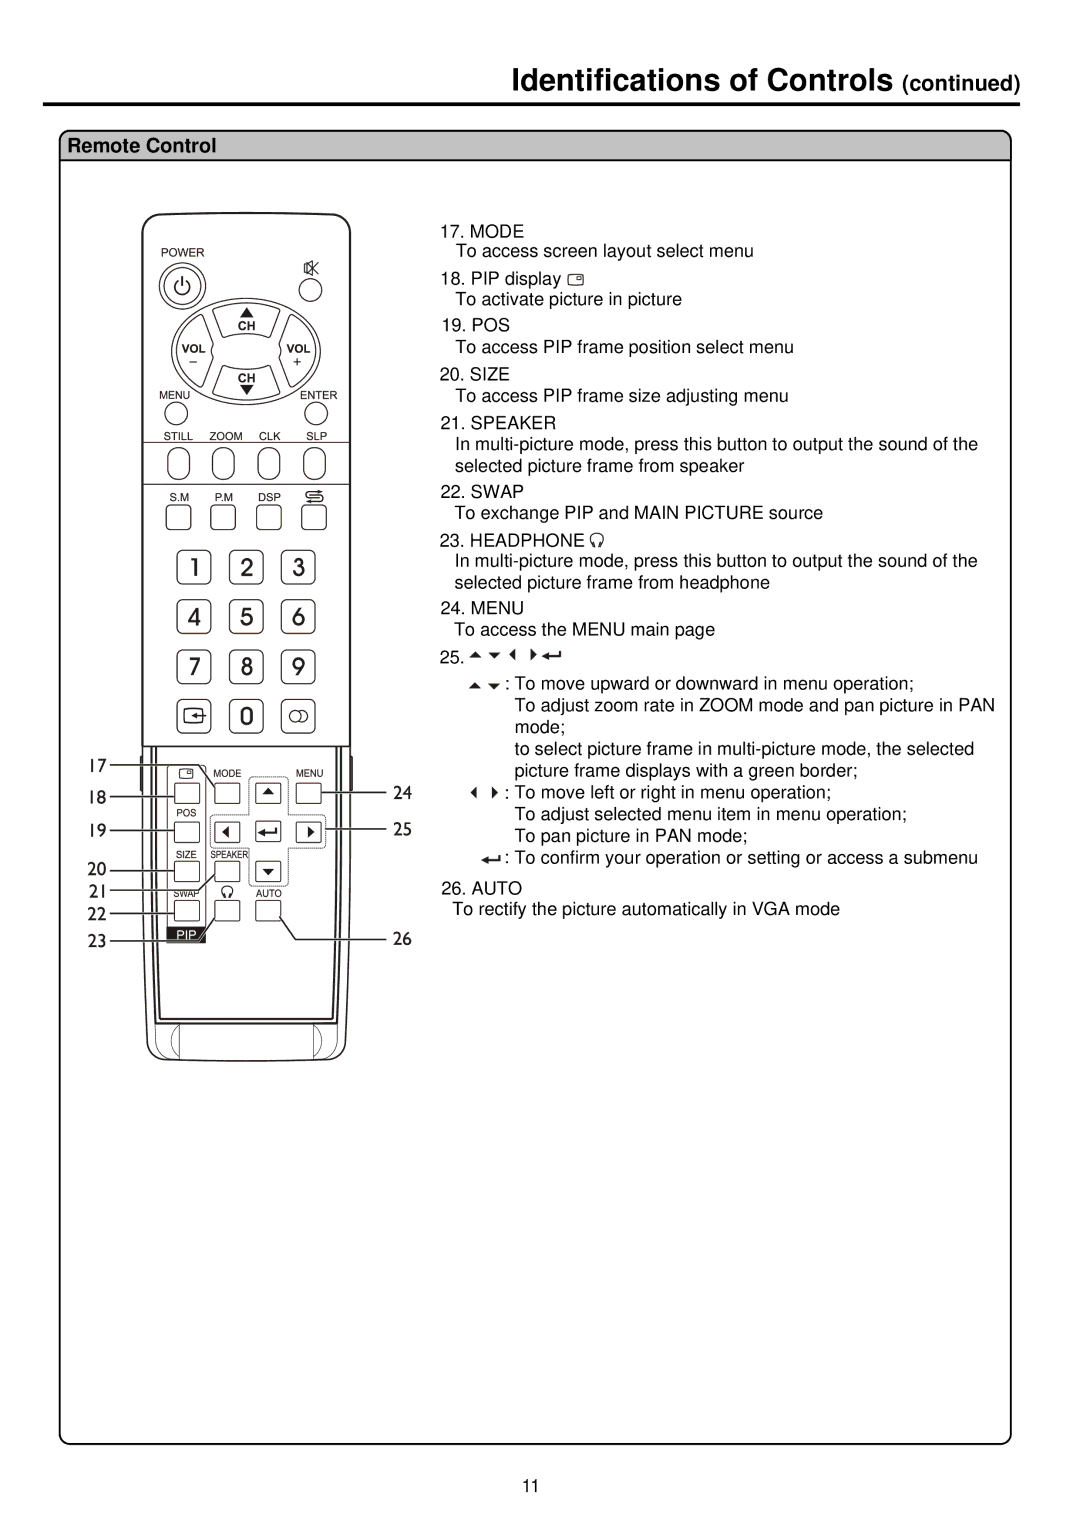 Palsonic PDP4250 owner manual Identifications of Controls, Speaker 